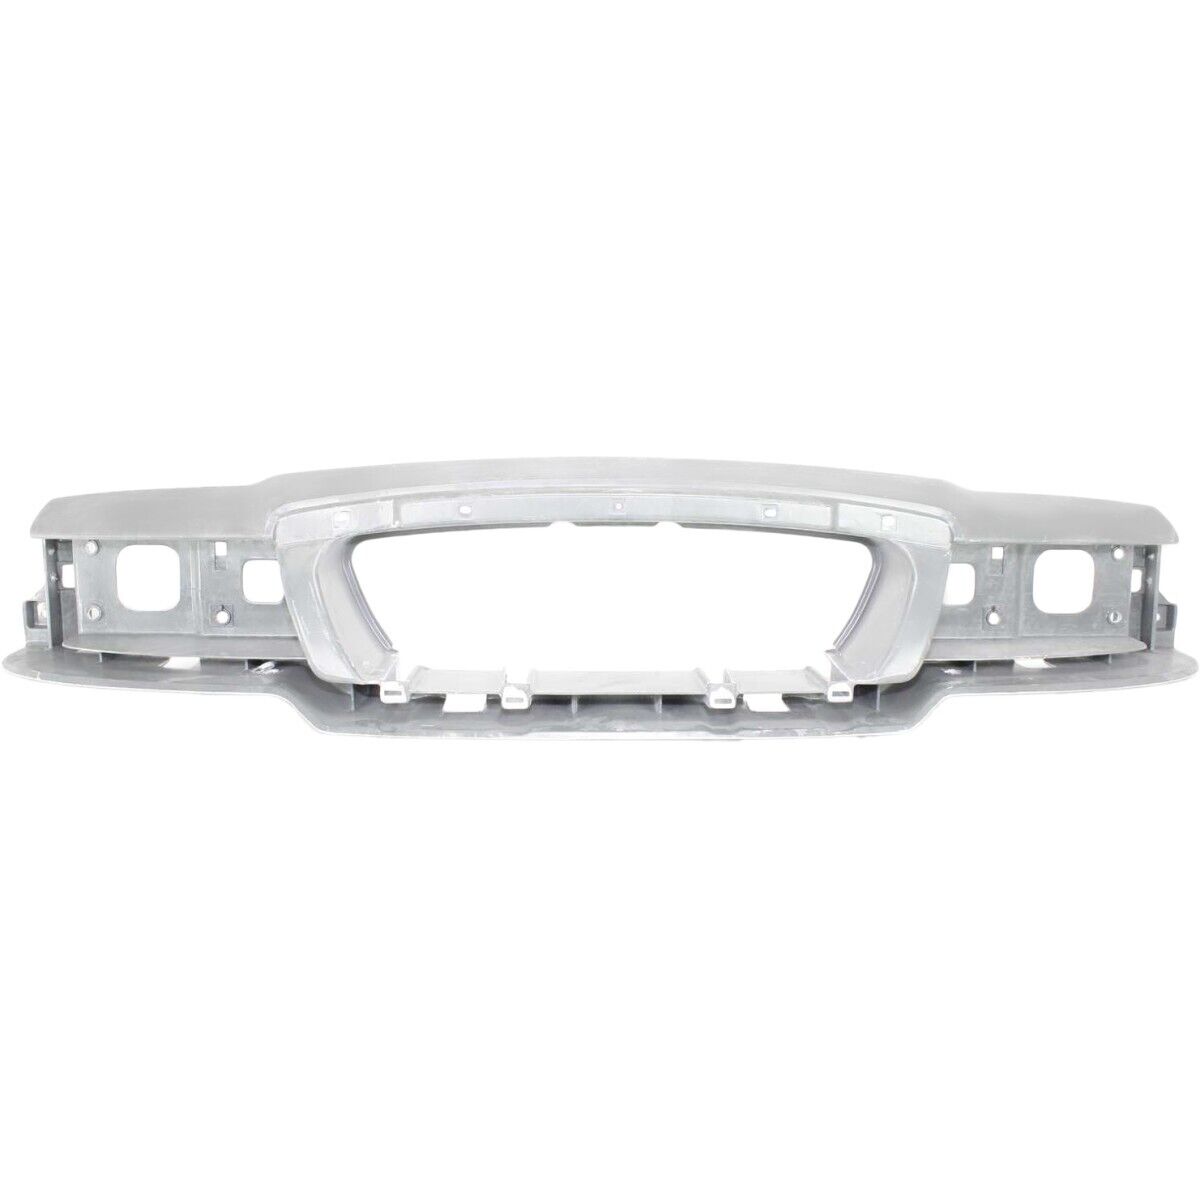 Header Panel Front  YW3Z8190AA for Mercury Grand Marquis 1998-2002